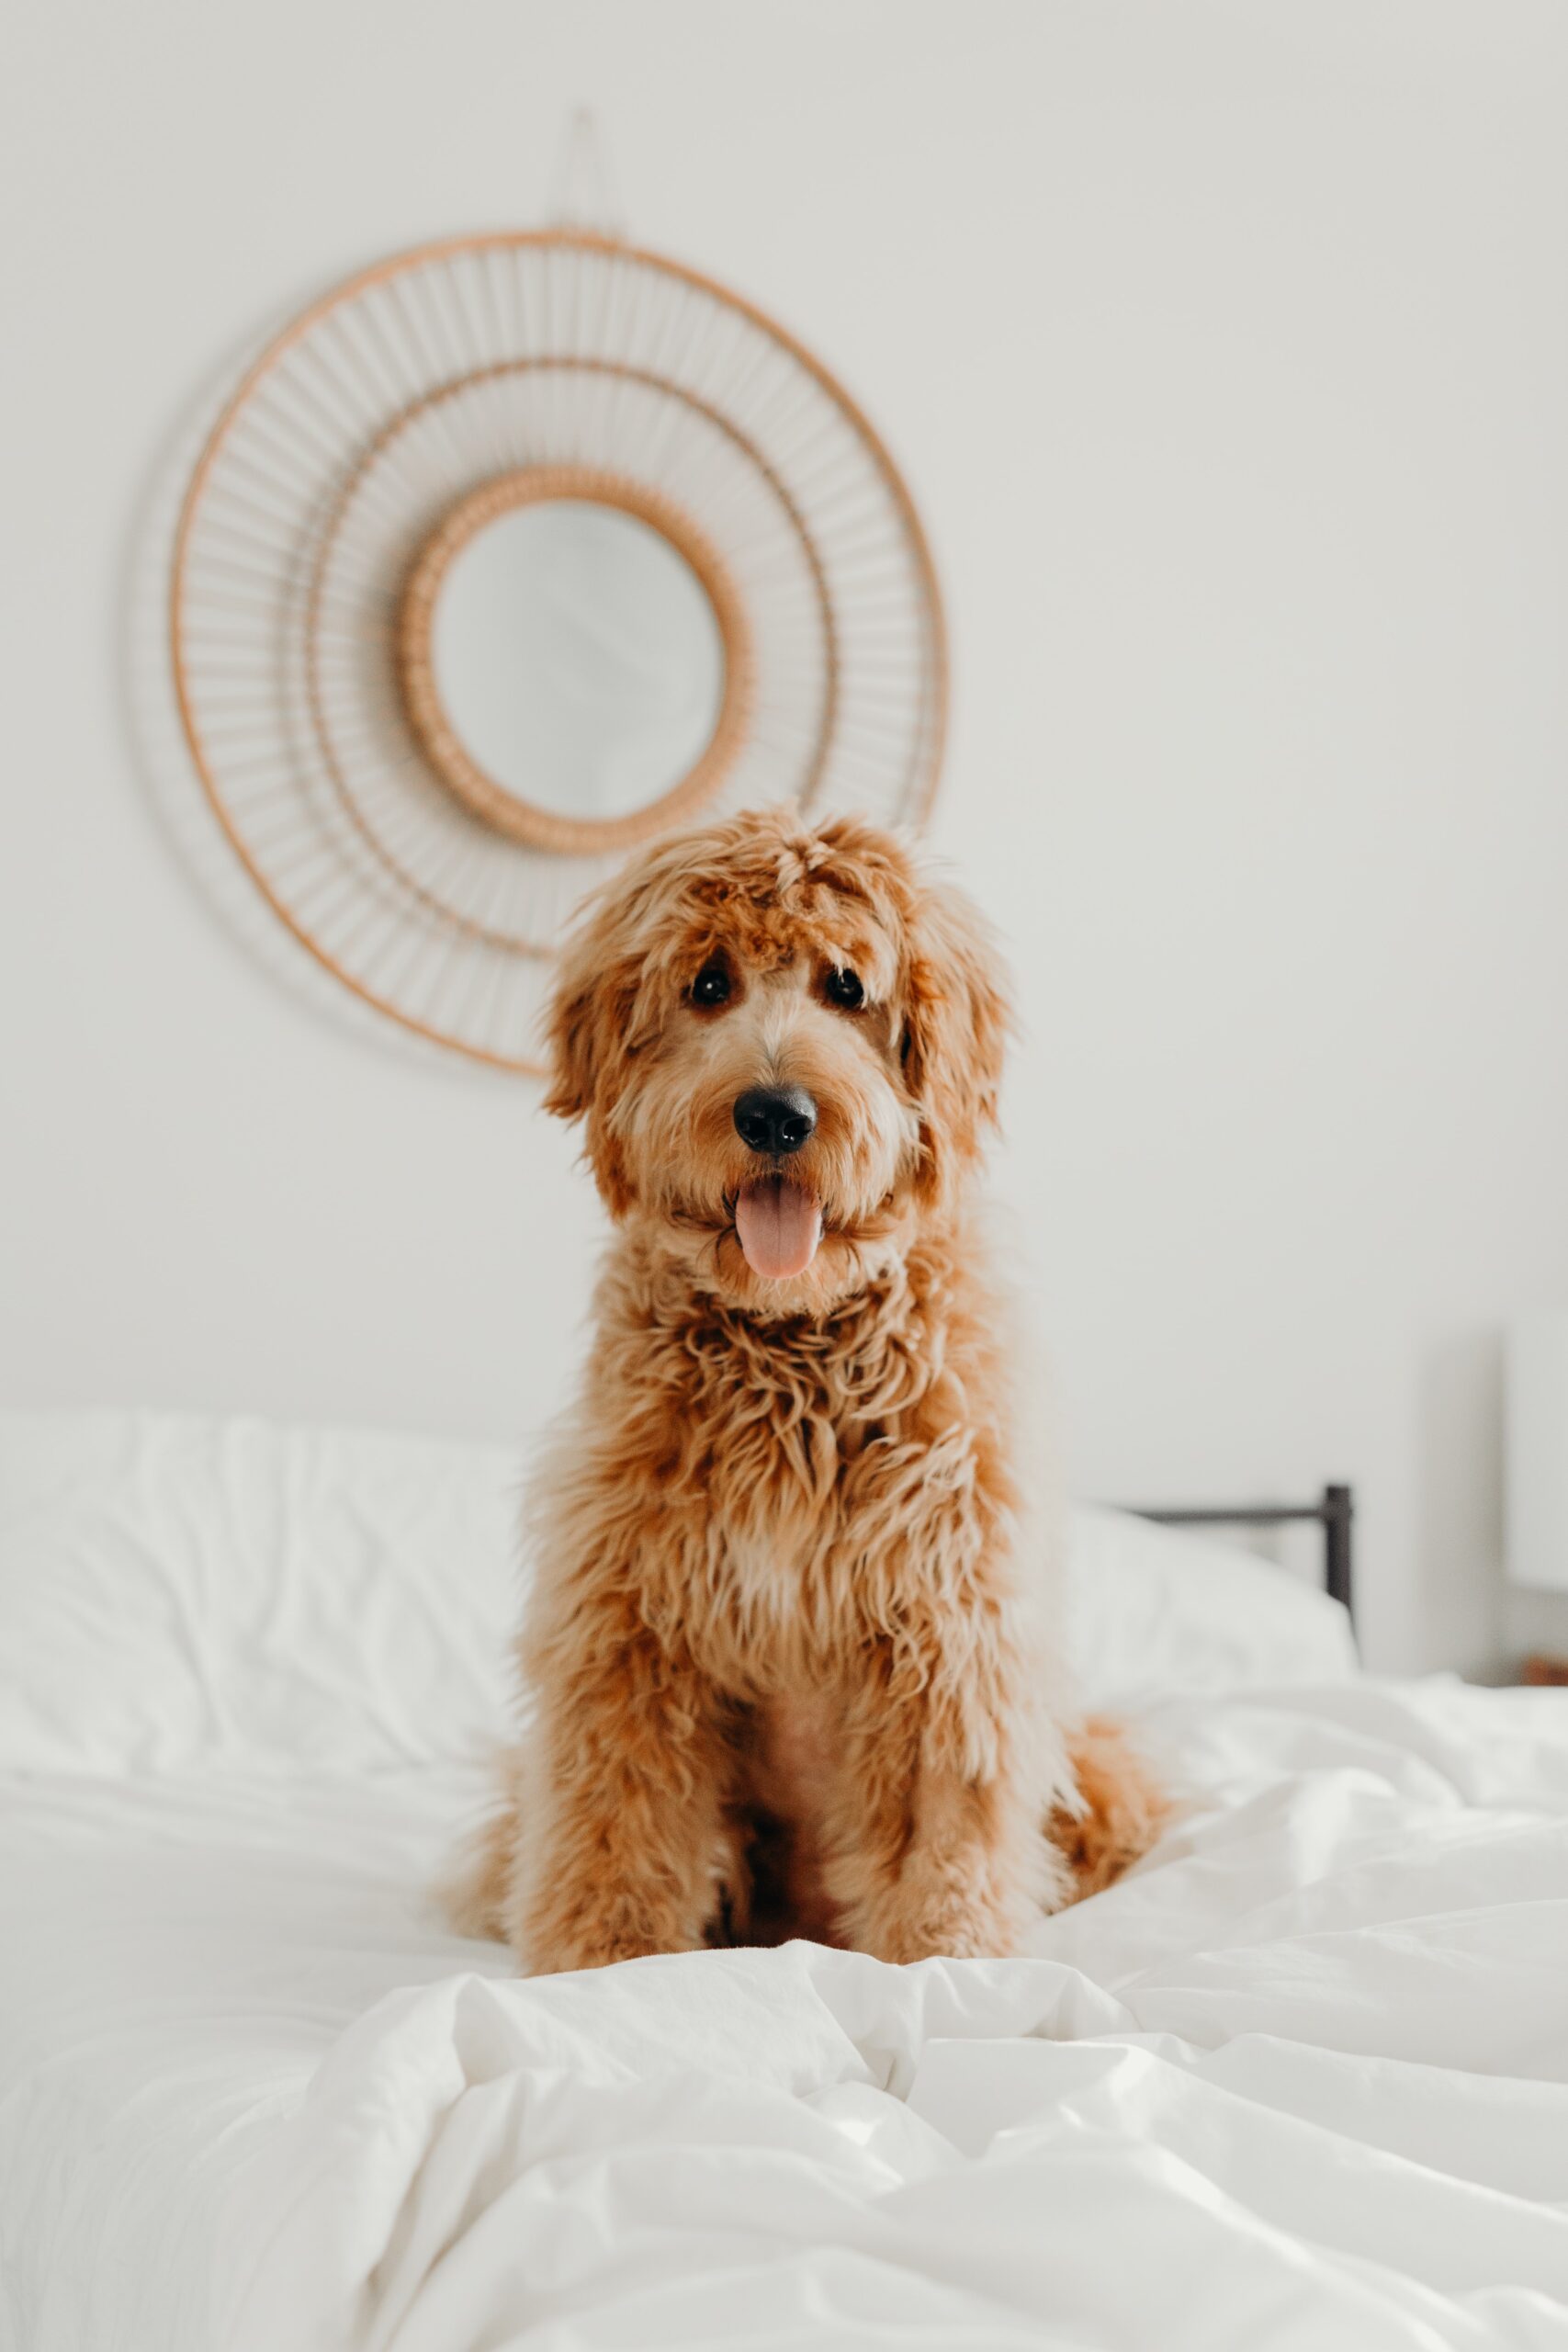 Goldendoodle sitting on a bed.